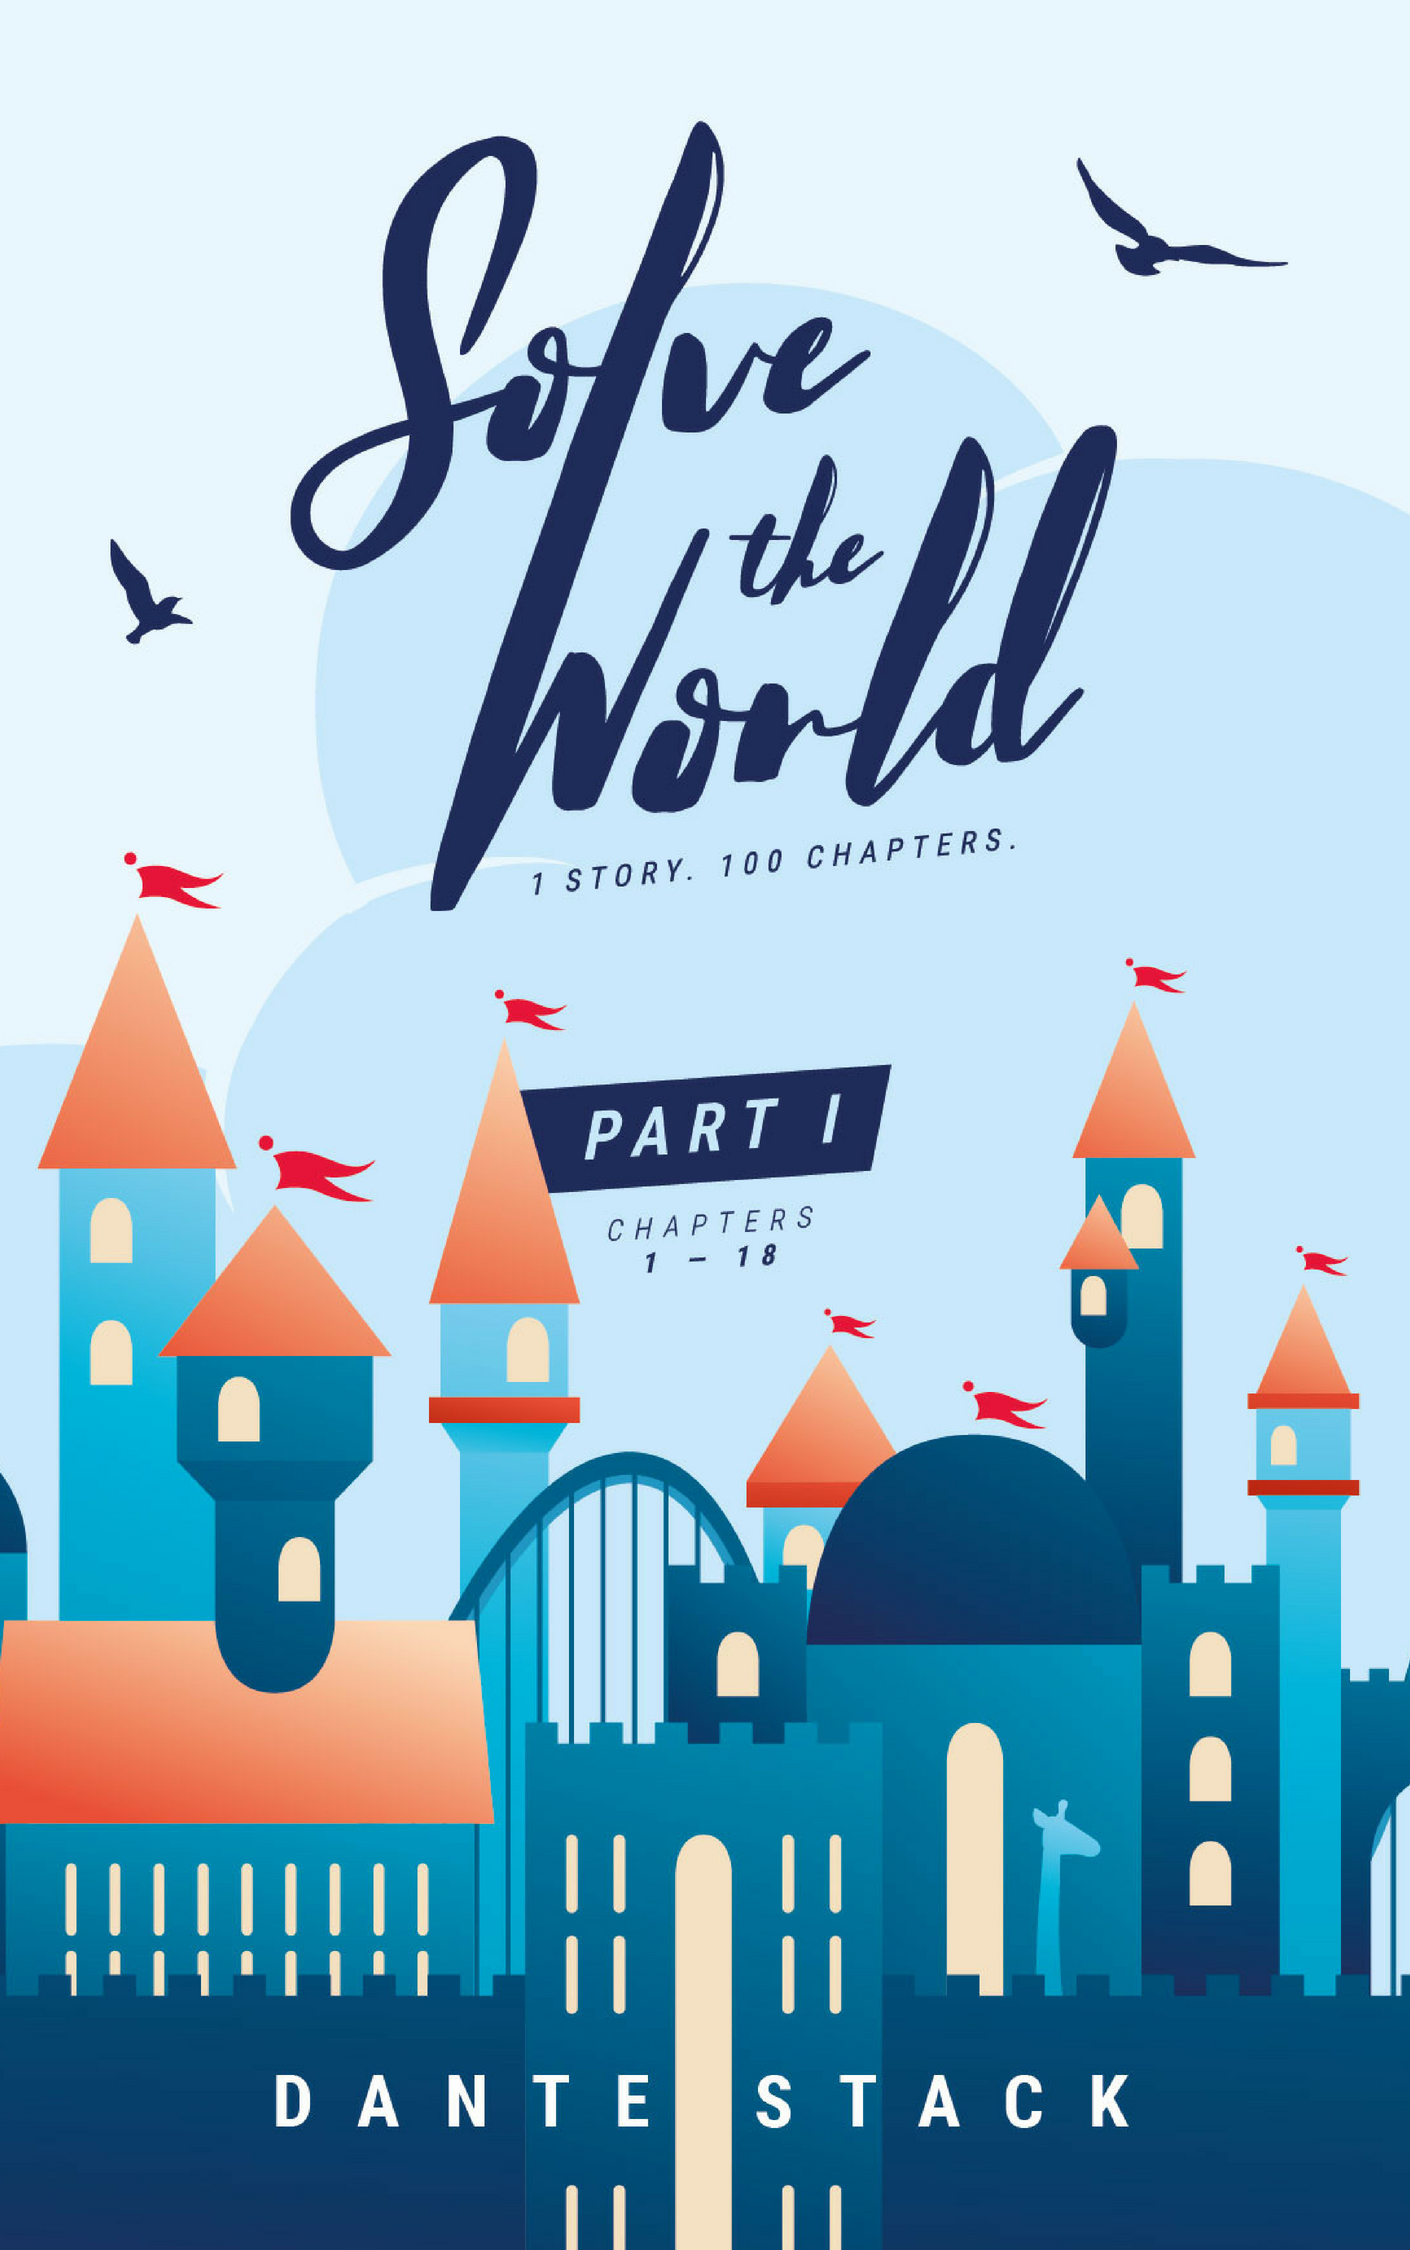 FREE: Solve the World: Part One by Dante Stack